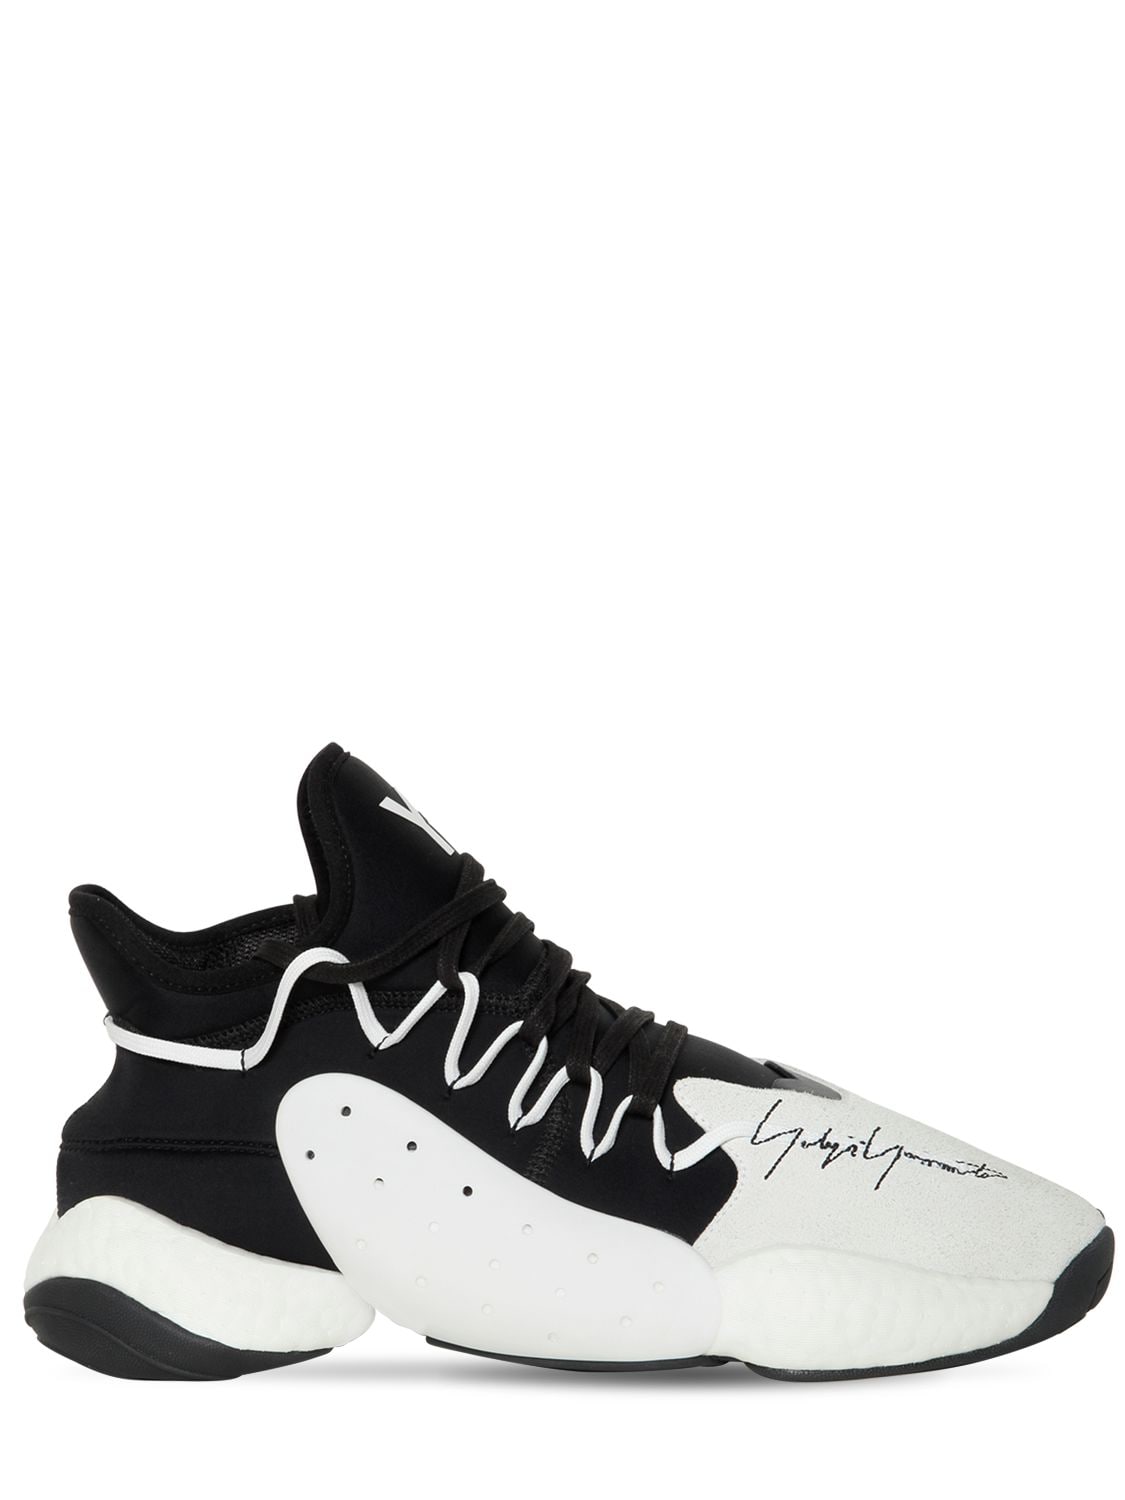 Y-3 BYW BASKETBALL BOOST trainers,68I0EI009-V0hJVEUvQkxBQ0s1